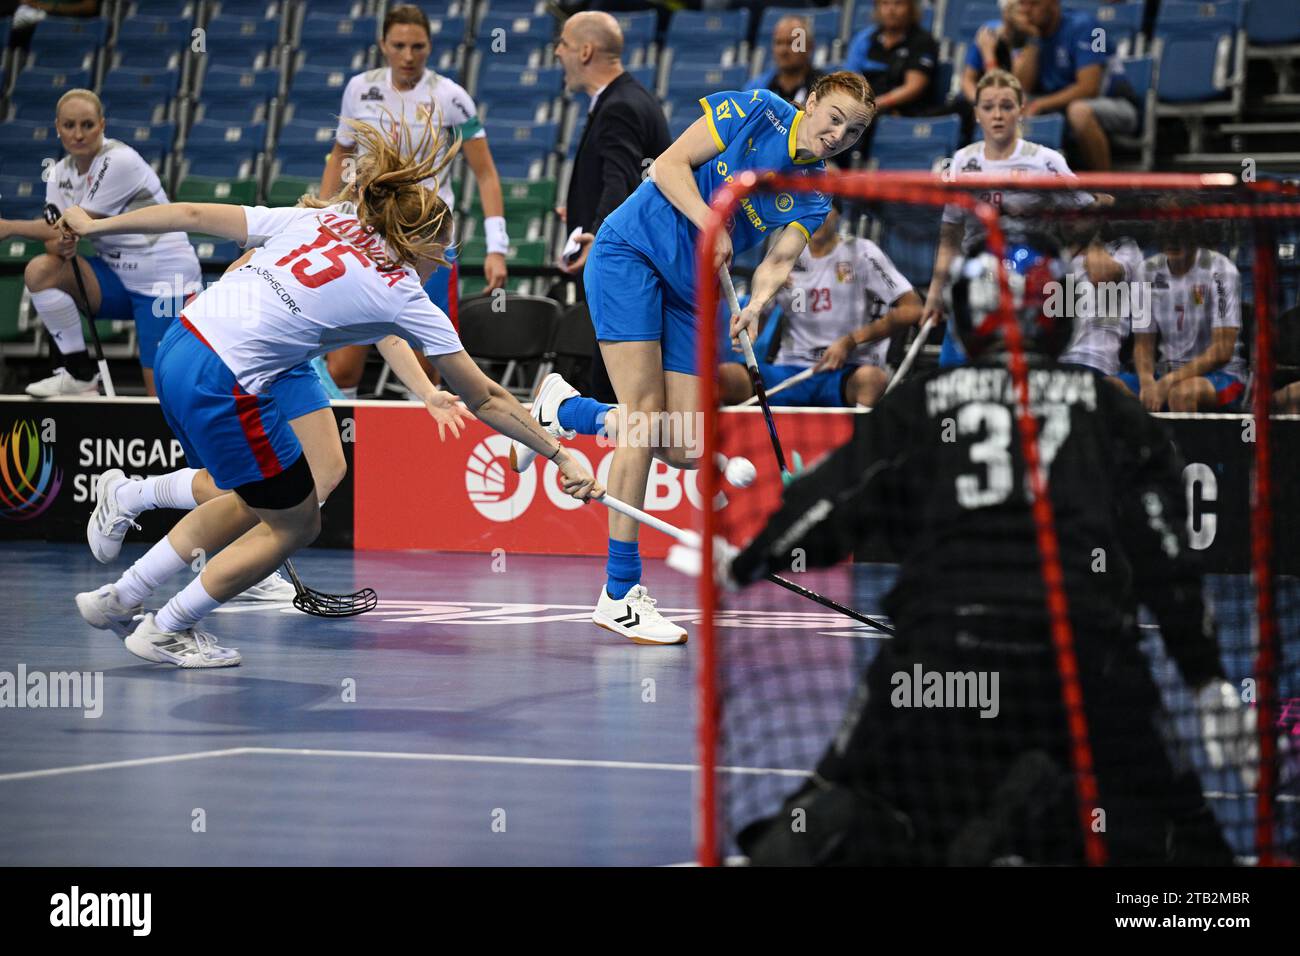 Singapore. 4th Dec, 2023. Ellen Rasmussen (R) of Sweden attempts a shot at goal during the group B match between the Czech Republic and Sweden at the International Floorball Federation's (IFF) Women's World Floorball Championship in Singapore on Dec.4, 2023. Credit: Then Chih Wey/Xinhua/Alamy Live News Stock Photo